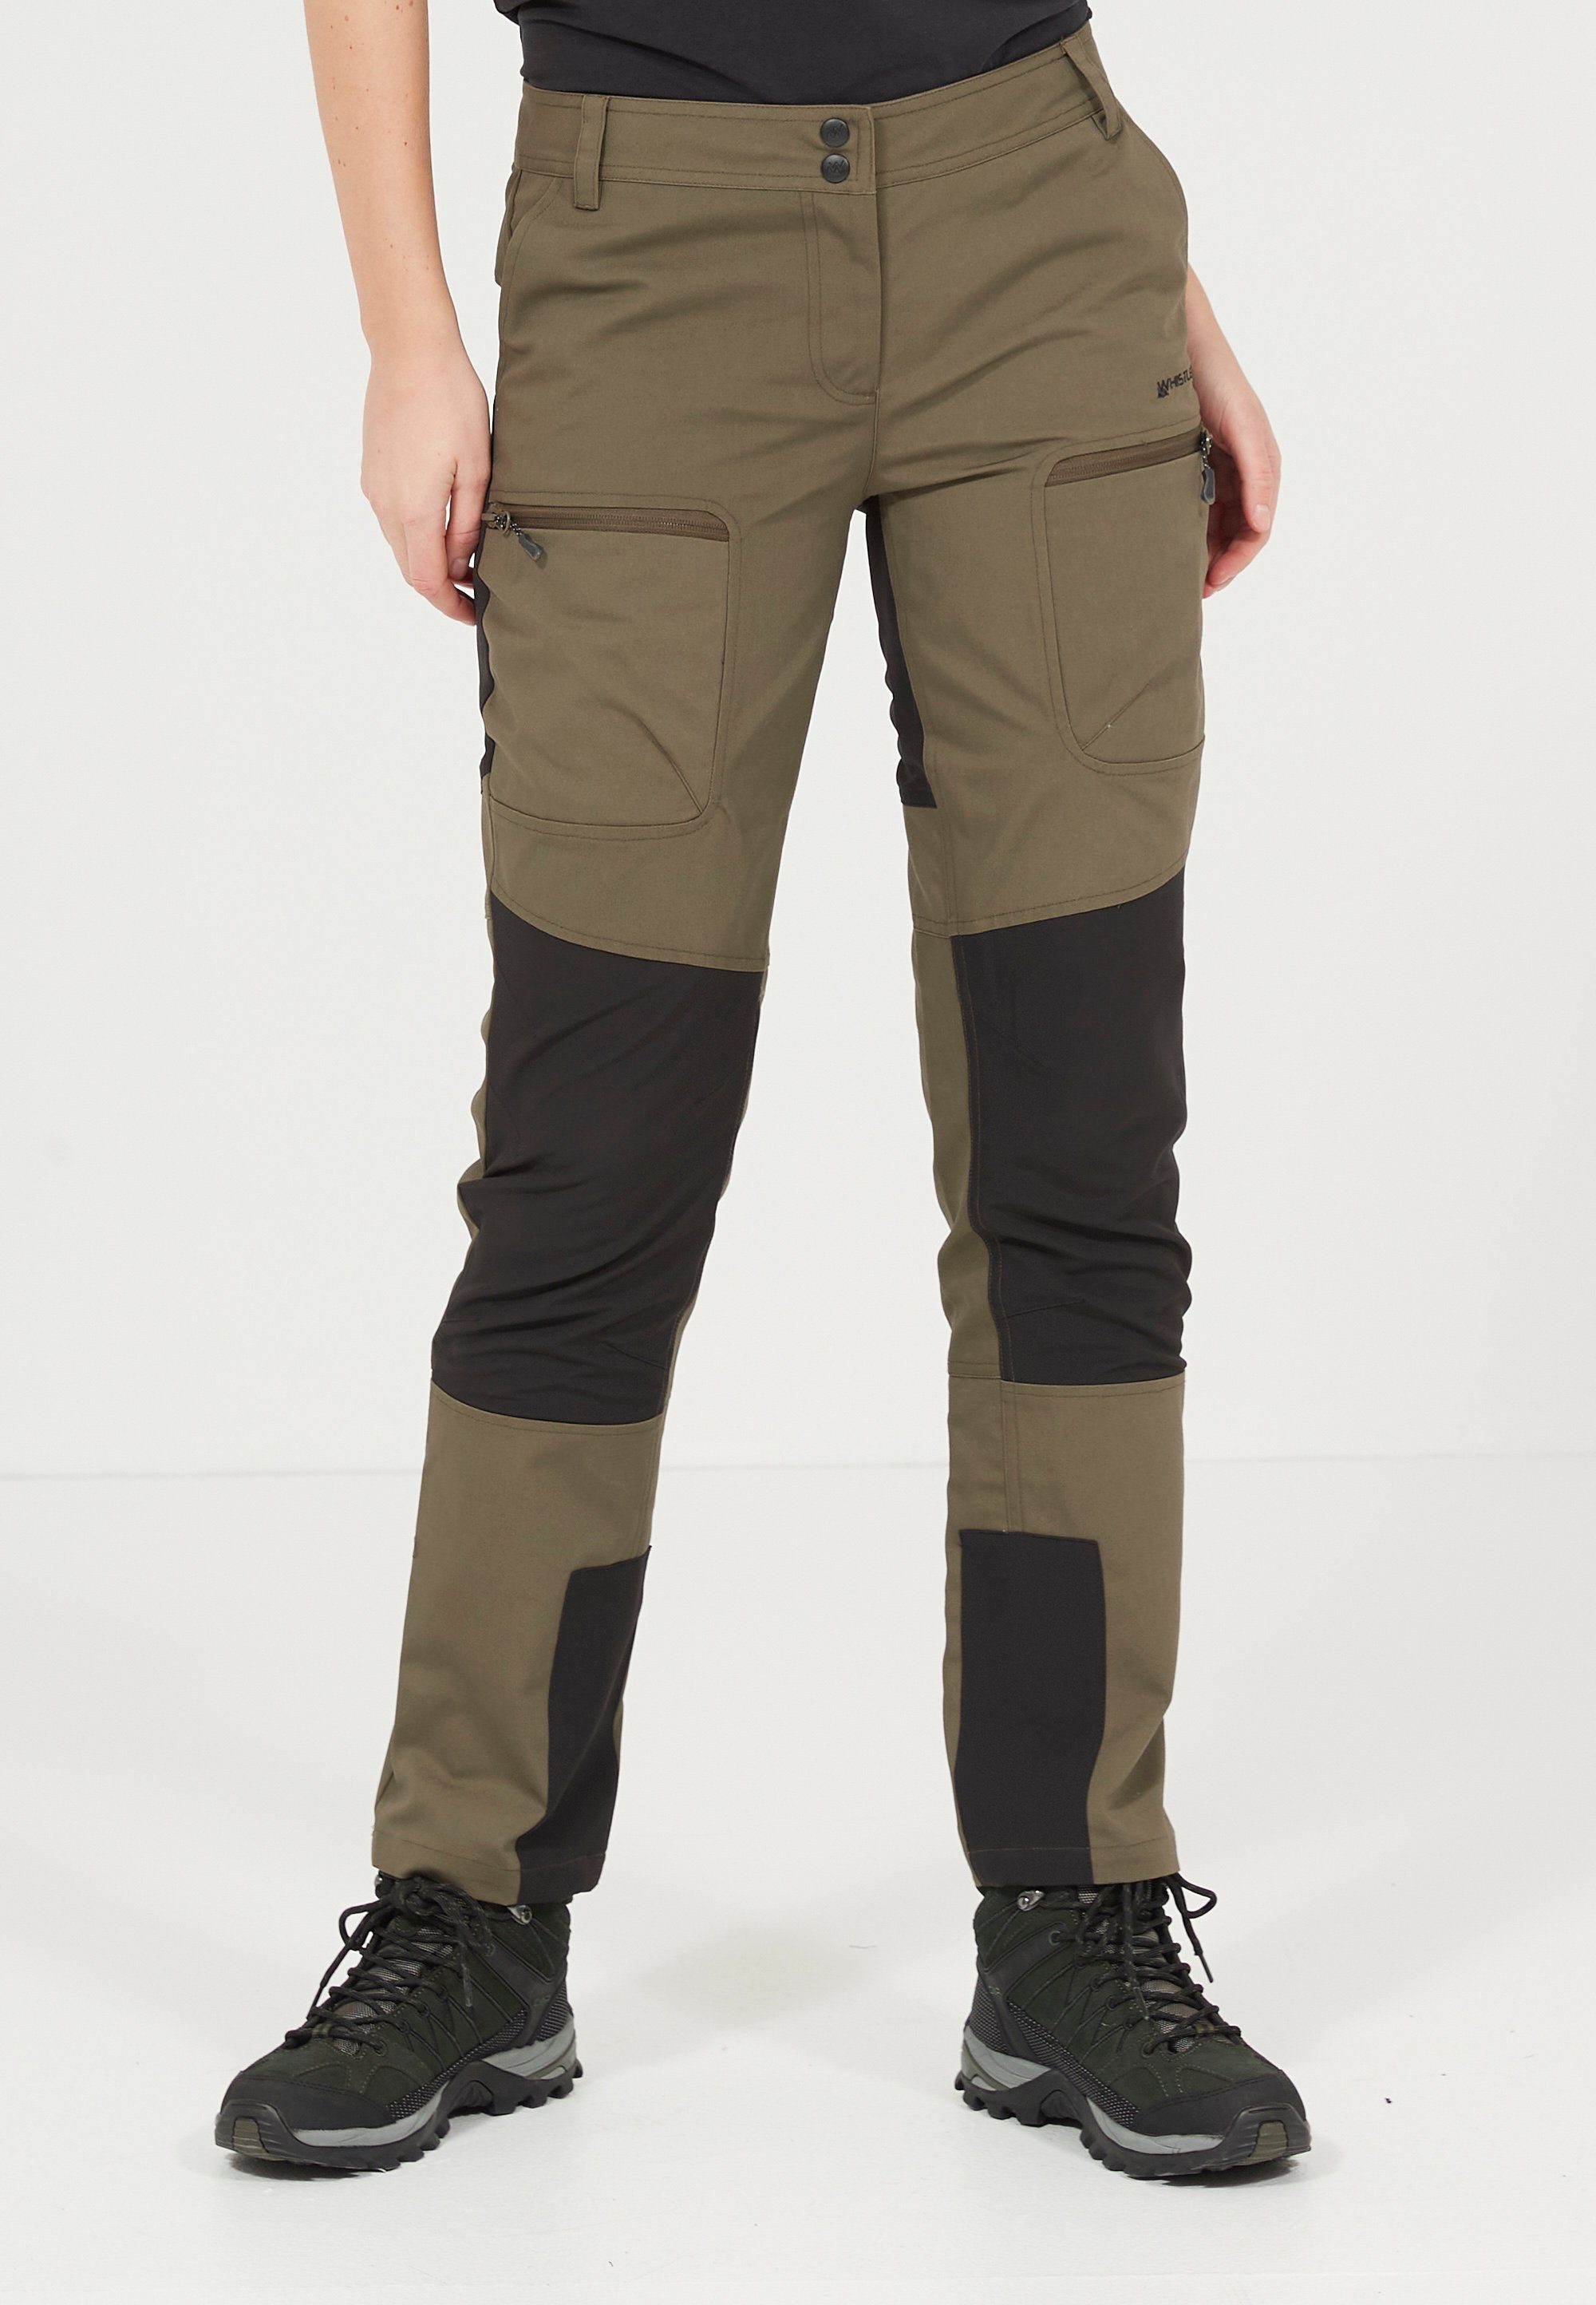 W Kniepatches ACTIV PANTS Cargohose mit funktionalen BLEE WHISTLER